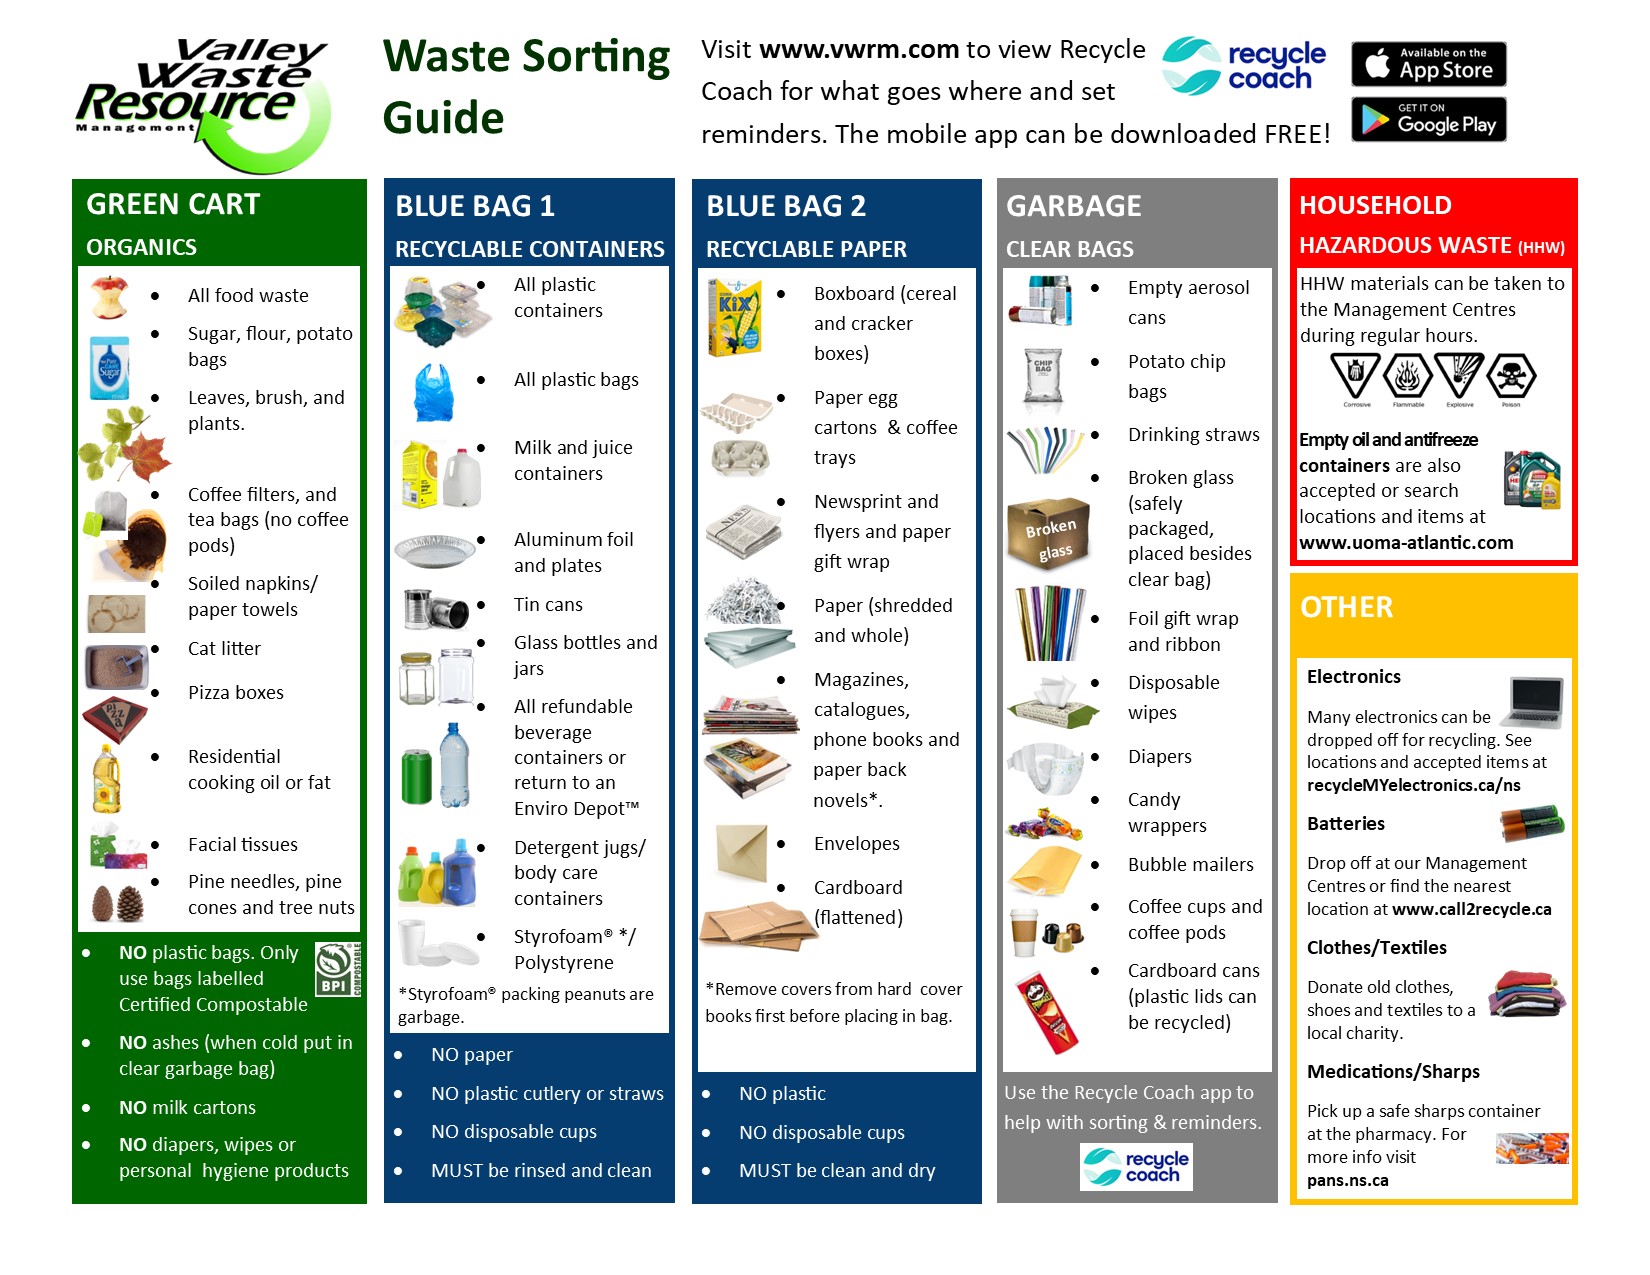 Sorting Guide and Calendar - Valley Waste-Resource Management